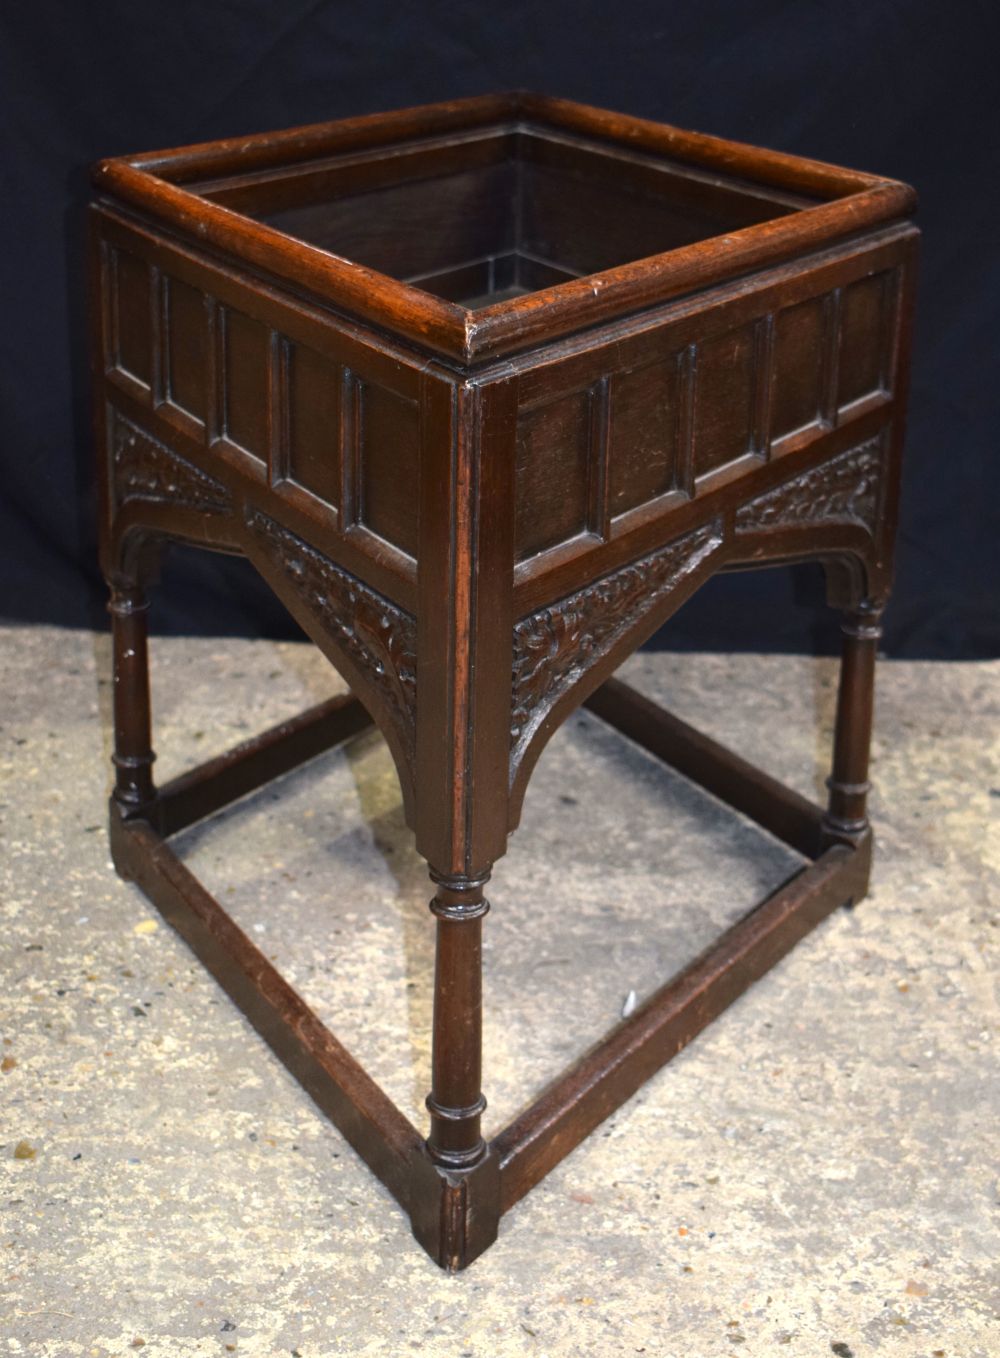 An unusual 19th Century Rhombus shaped carved mahogany planter 57 x 104 x 60 cm - Image 7 of 8